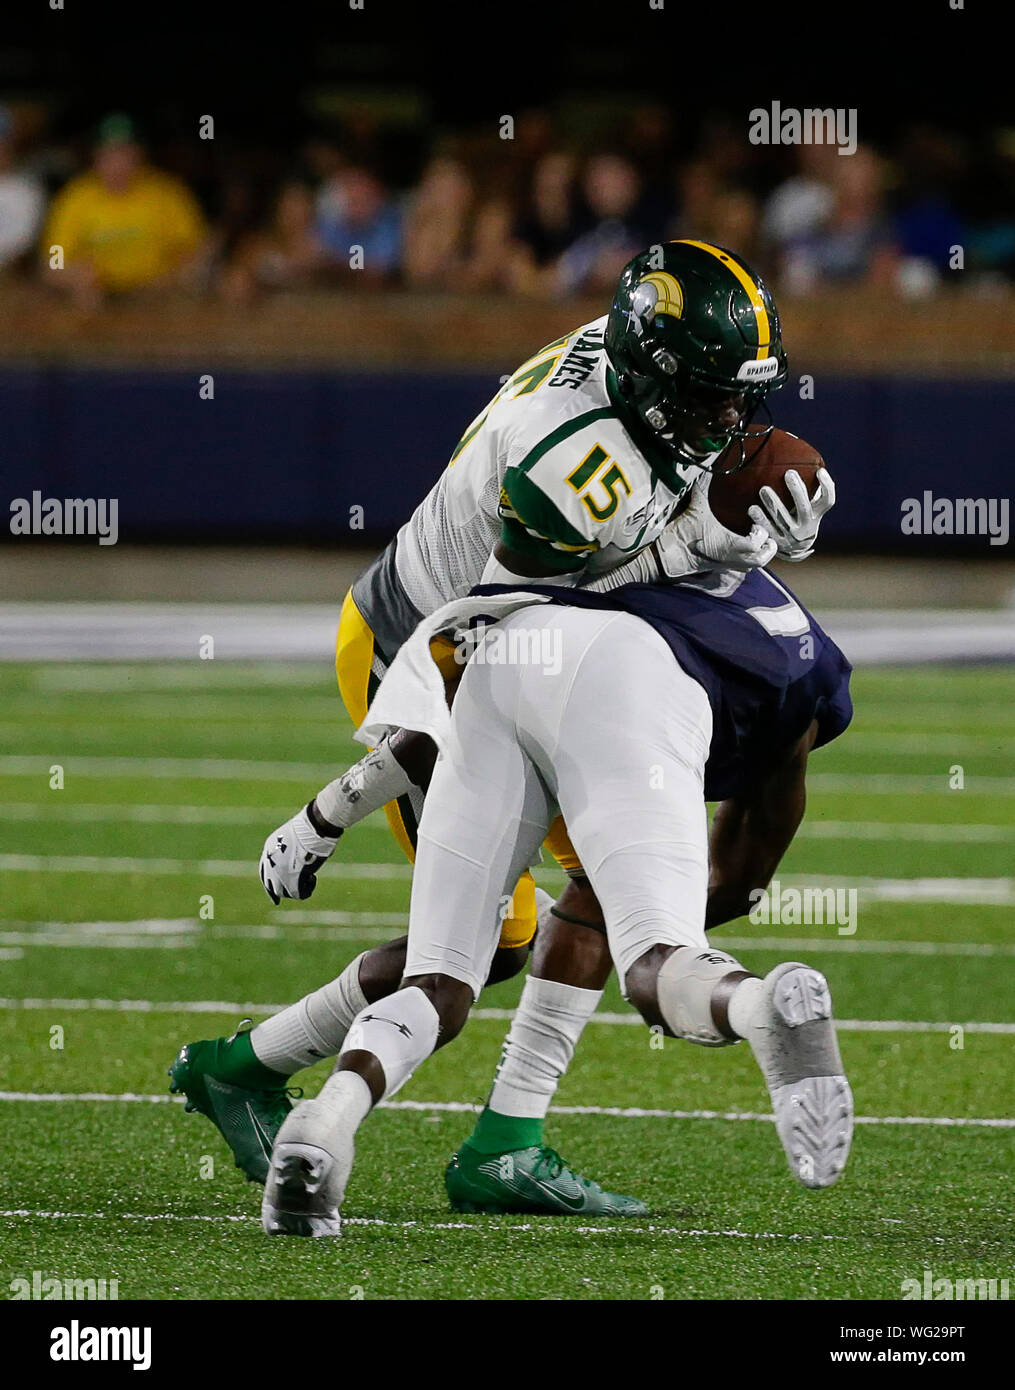 August 31, 2019: Norfolk State Spartans WR #15 Da'Kendall James is hit by ODU Monarchs WR #17 John Johnson after catching the ball during a NCAA football game between the Old Dominions Monarchs and the Norfolk State Spartans at S.B. Ballard Stadium in Norfolk, VA. Justin Cooper/CSM Stock Photo